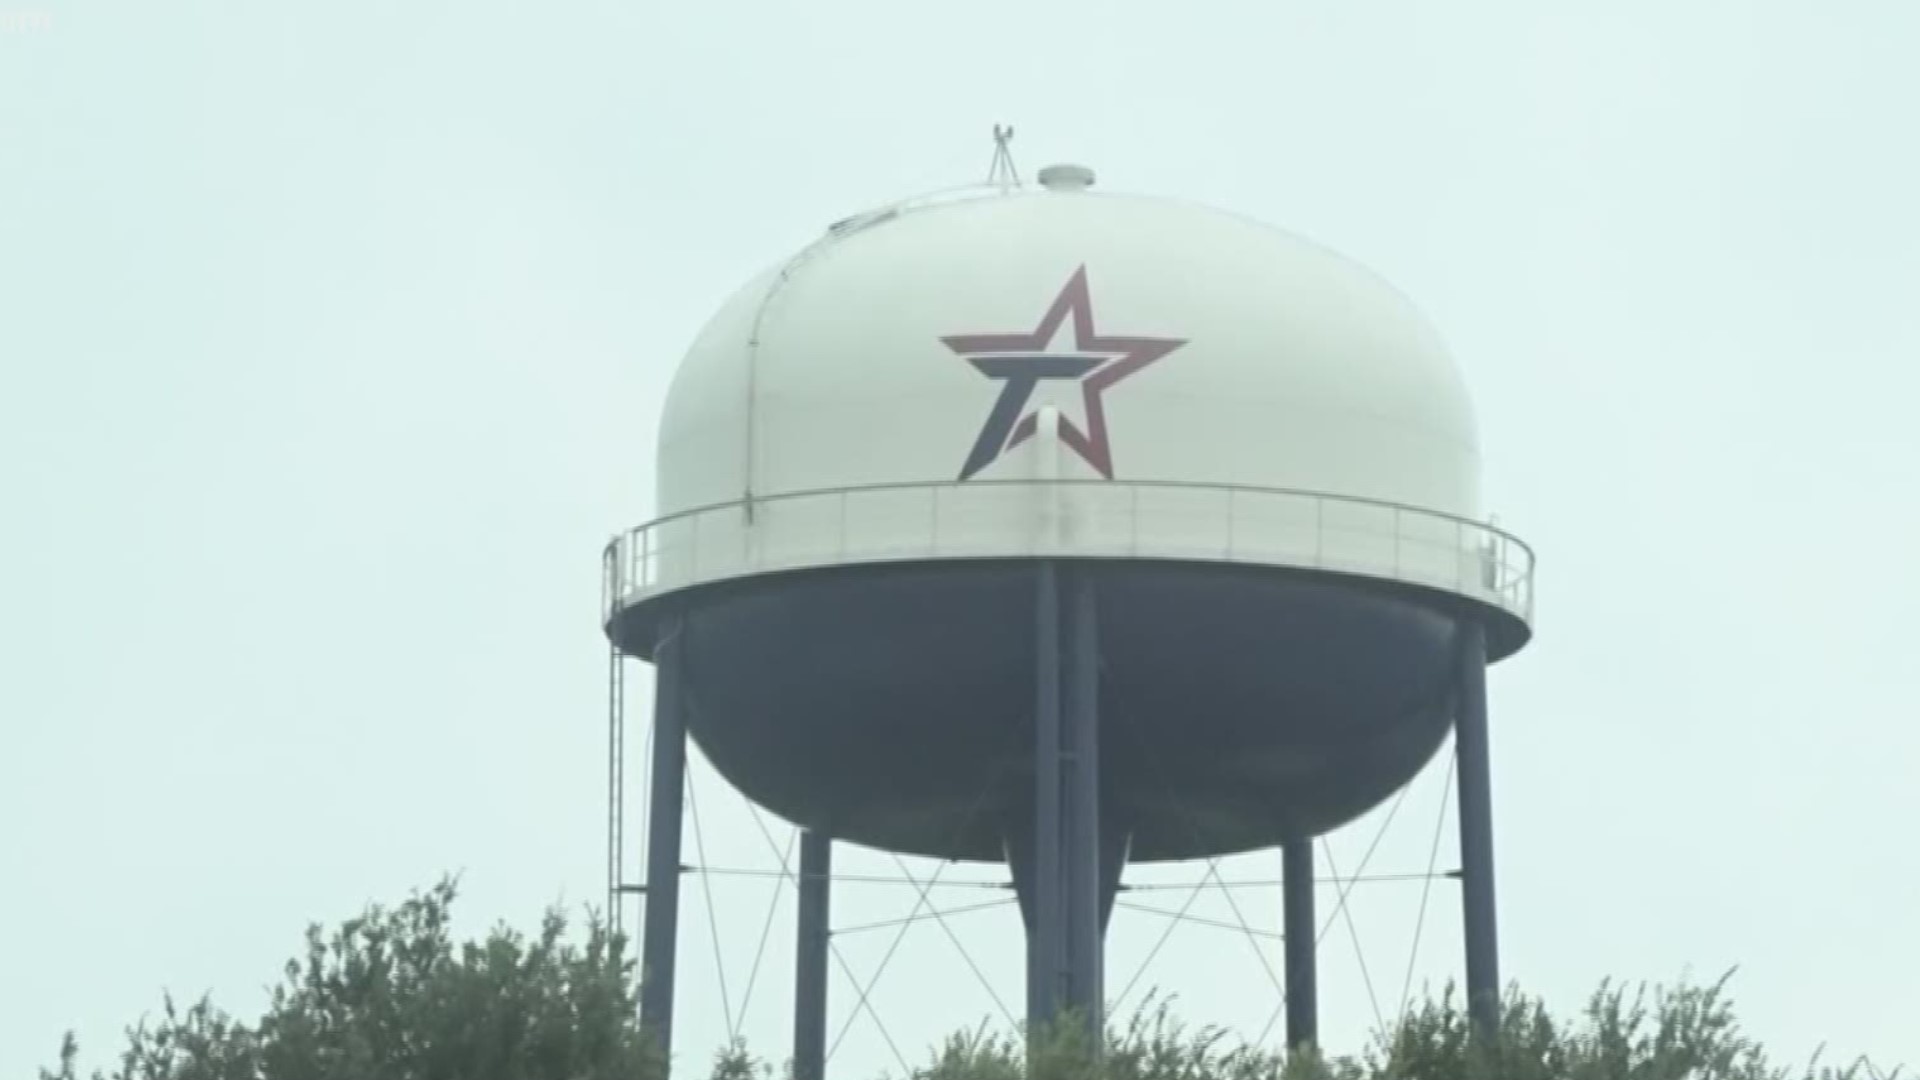 A Temple neighborhood wants answers after the city chose to build a water tower right next to them.